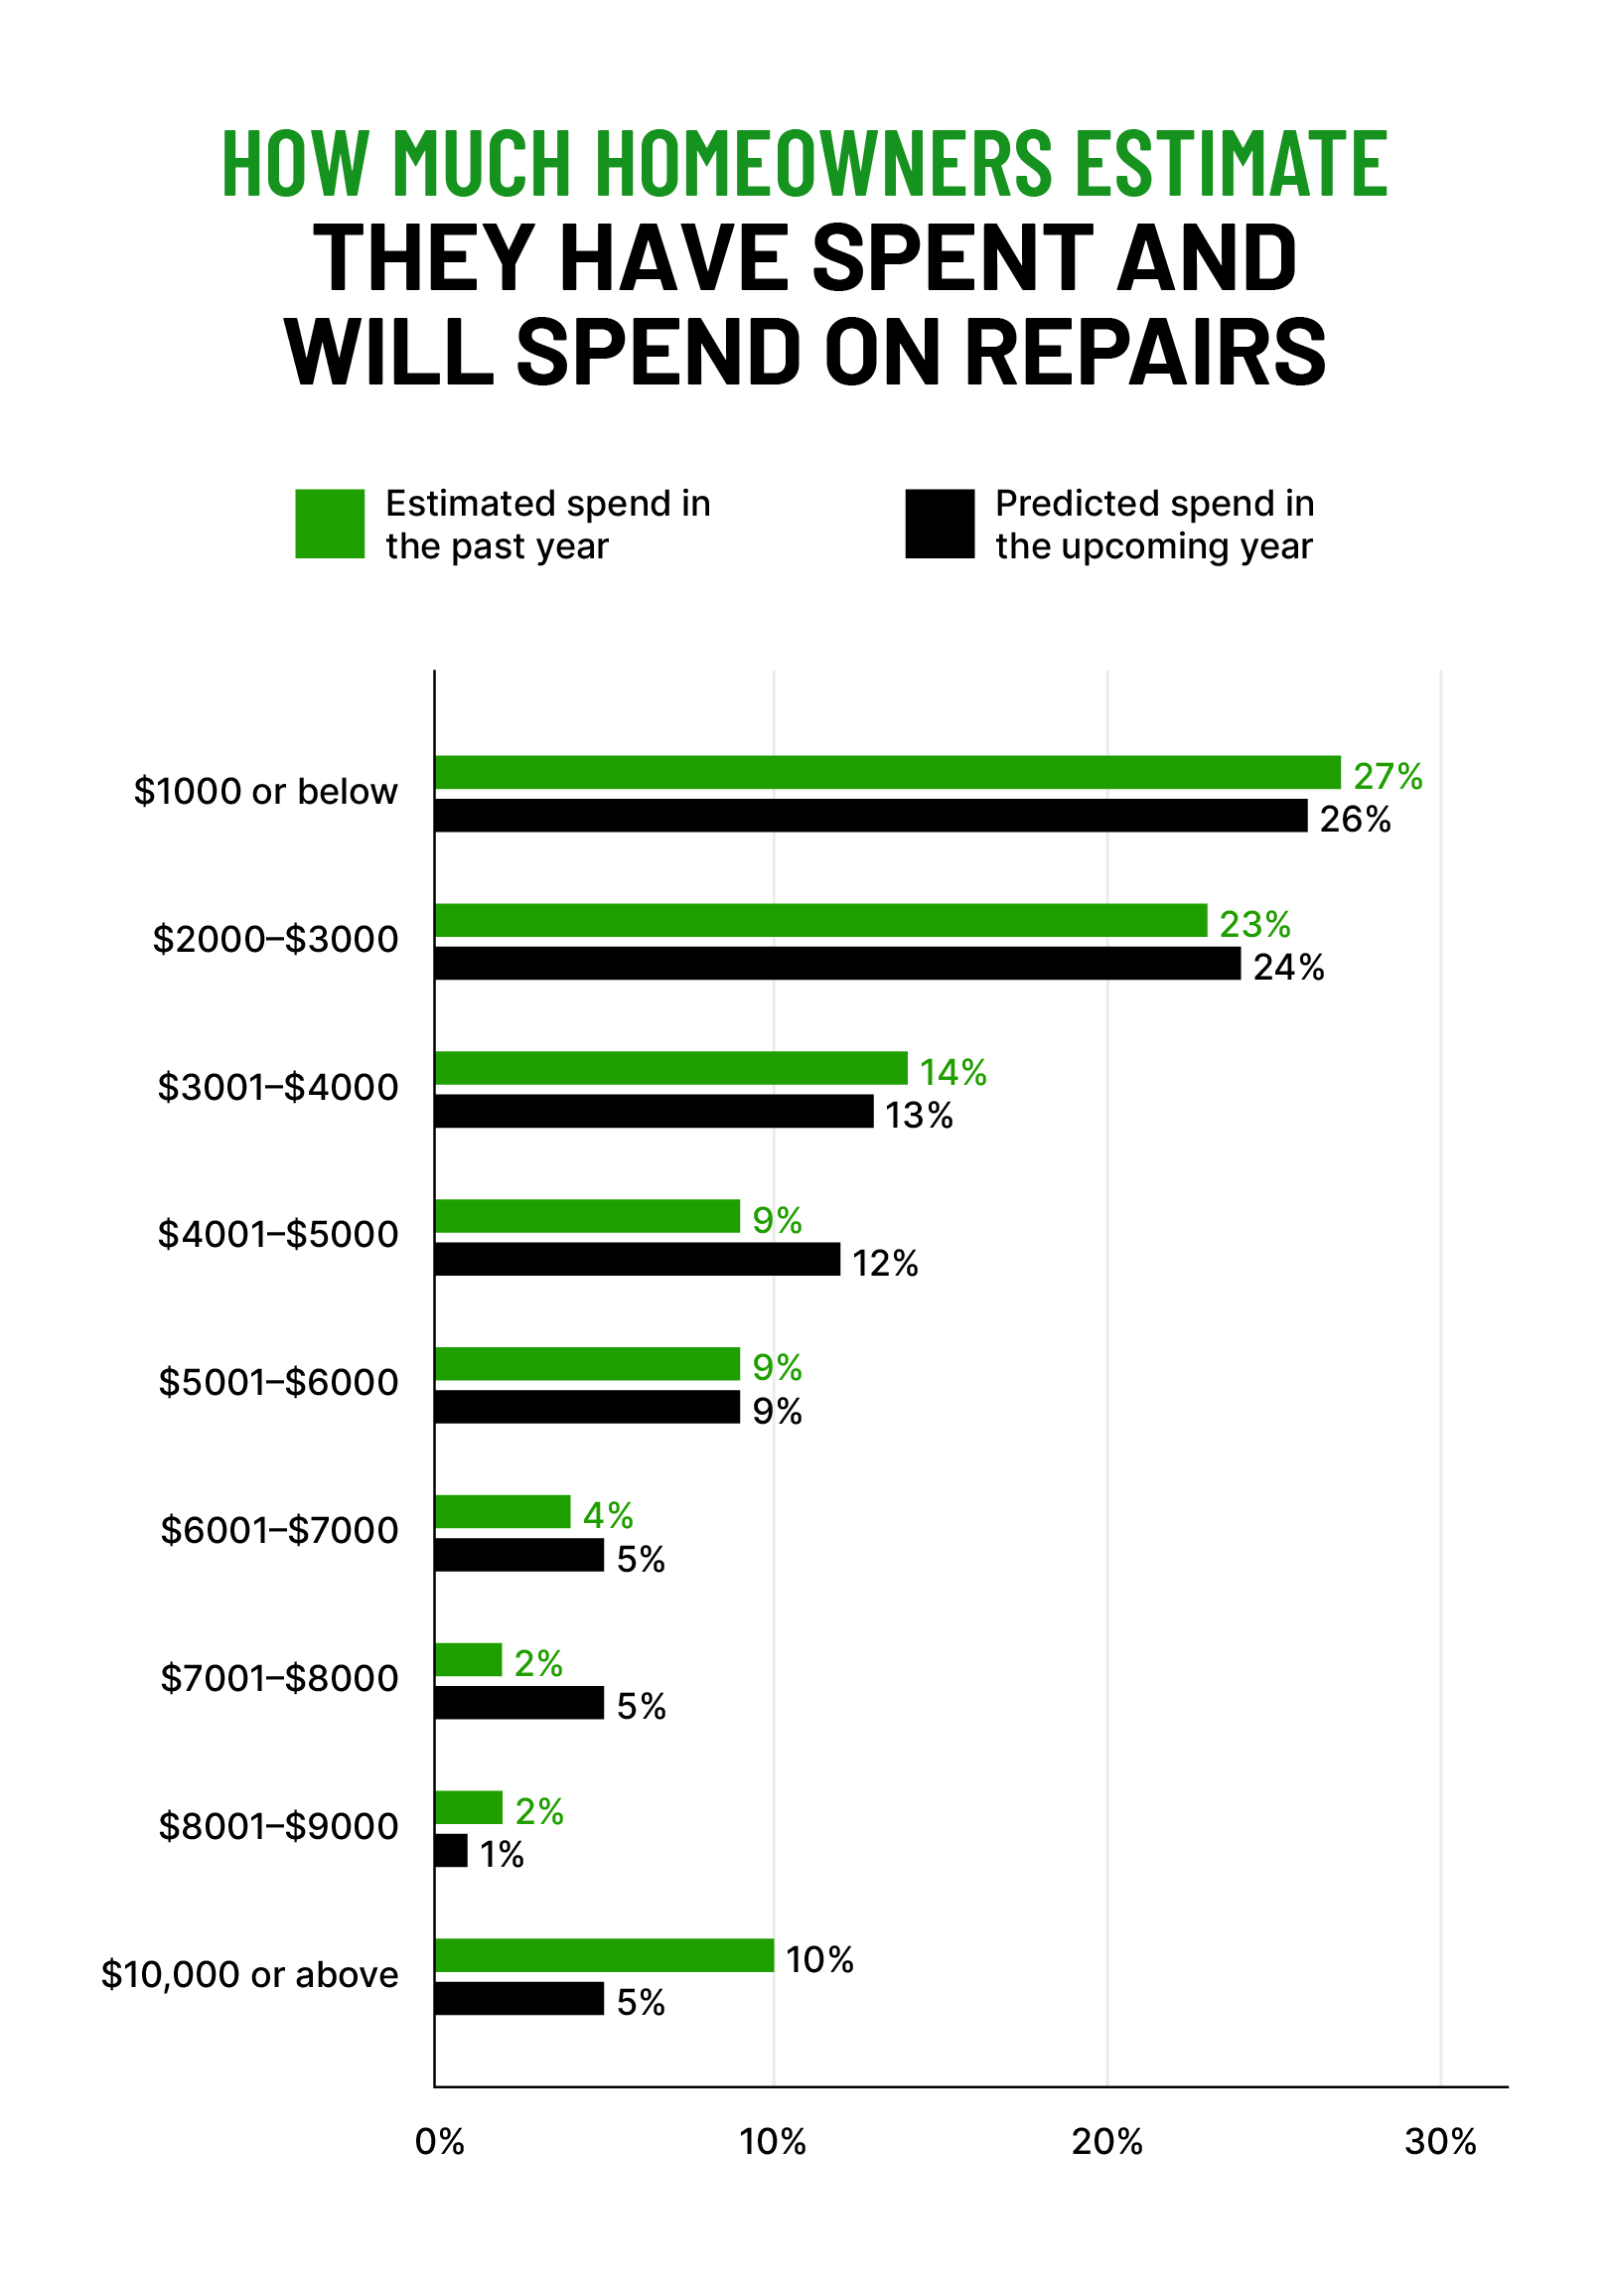 horizontal bar chart summarizing how much homeowners estimated they spent in the past year and will spend on repairs